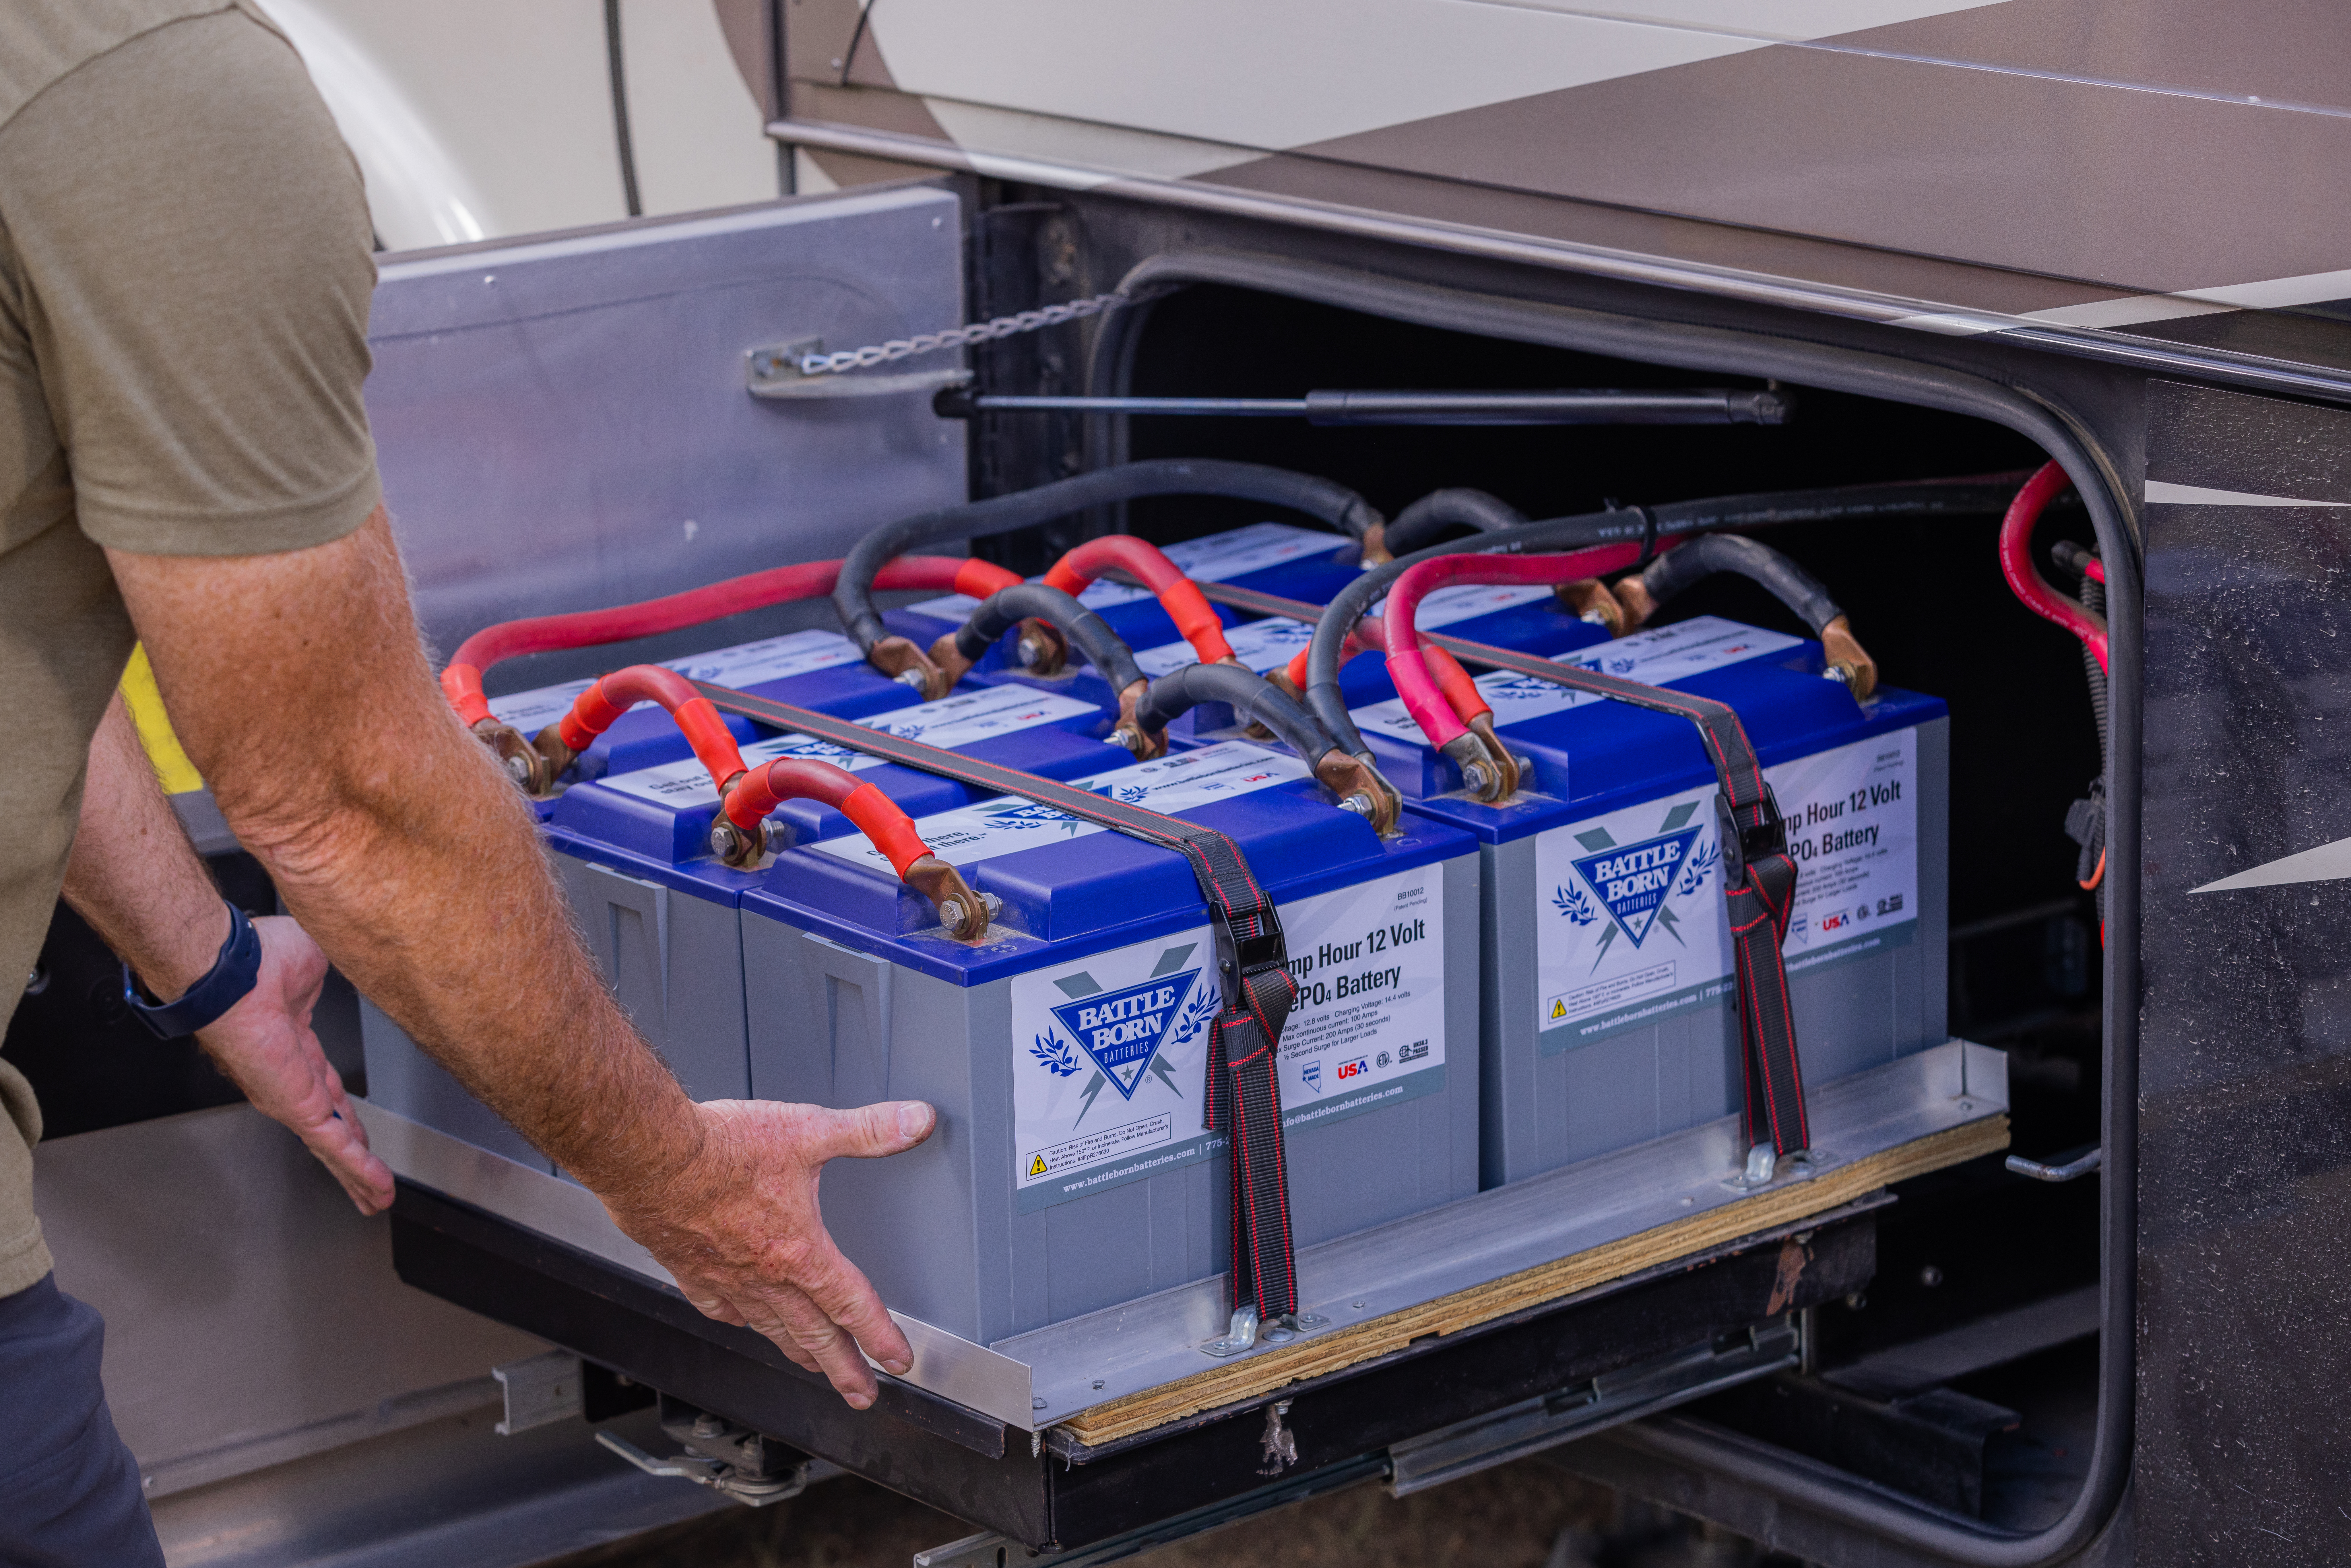 You, Me, and the RV lithium power system